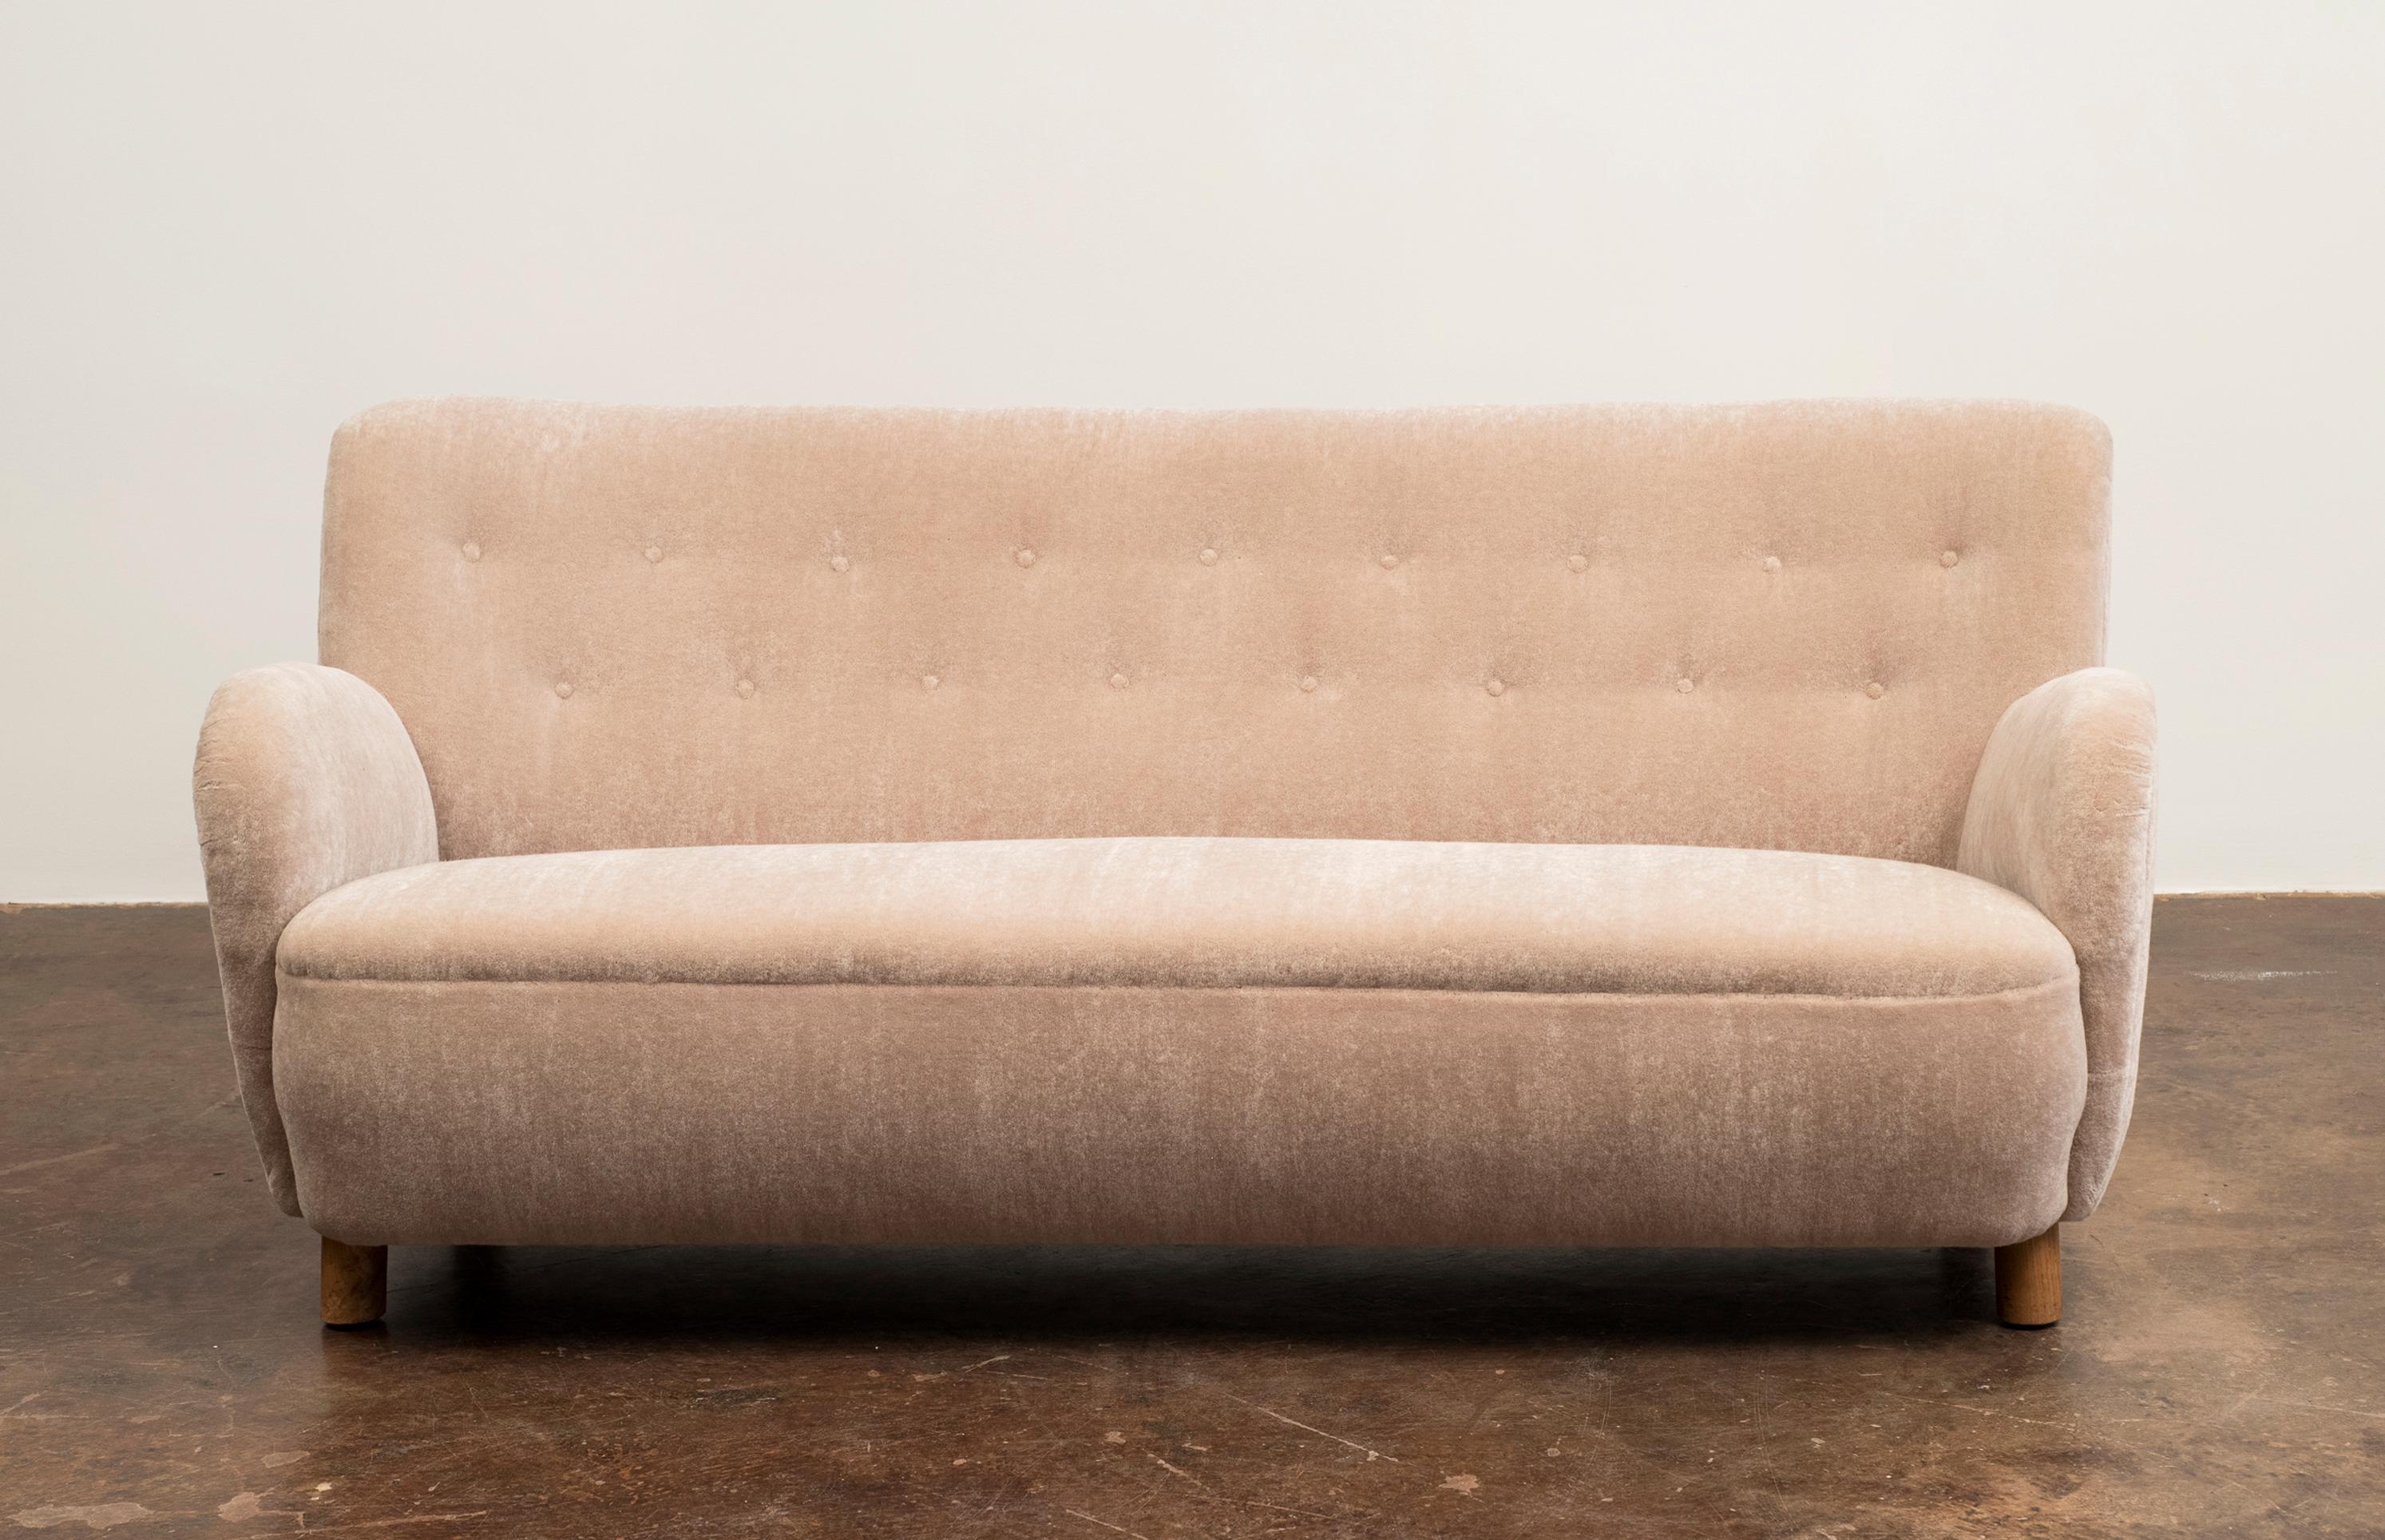 A Danish cabinet maker's sofa recently reupholstered in a lush champagne mohair velvet by Leo Schellens with button-fitted back and graceful, curved arms. Denmark, 1940s.